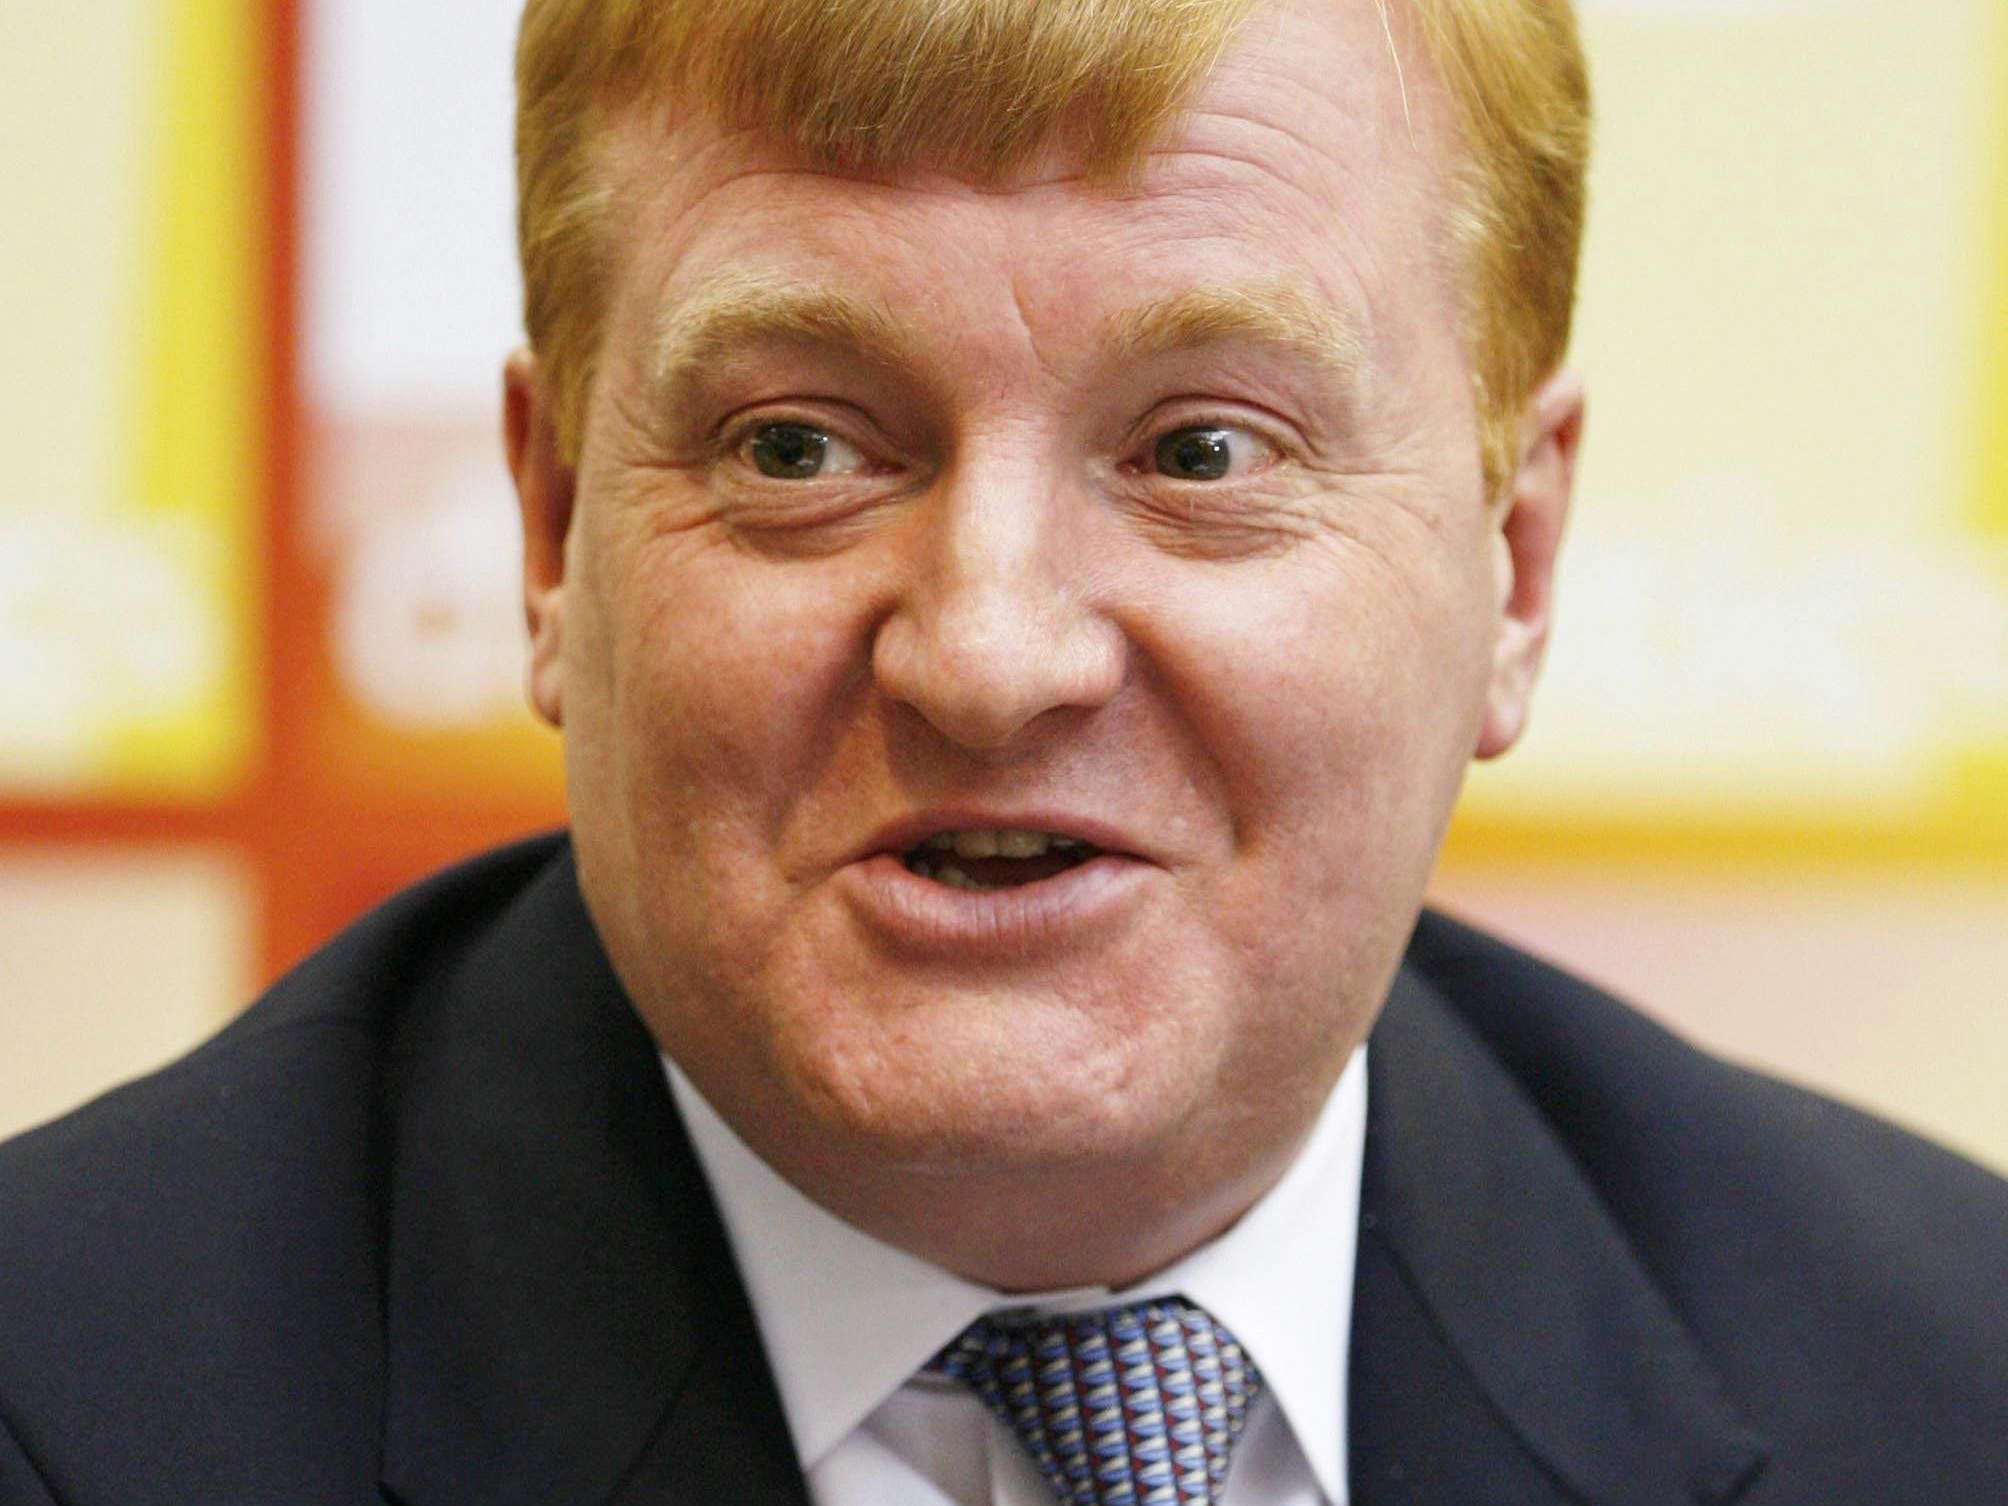 Charles Kennedy’s family ‘extremely pleased’ at Lib Dem win, new MP says